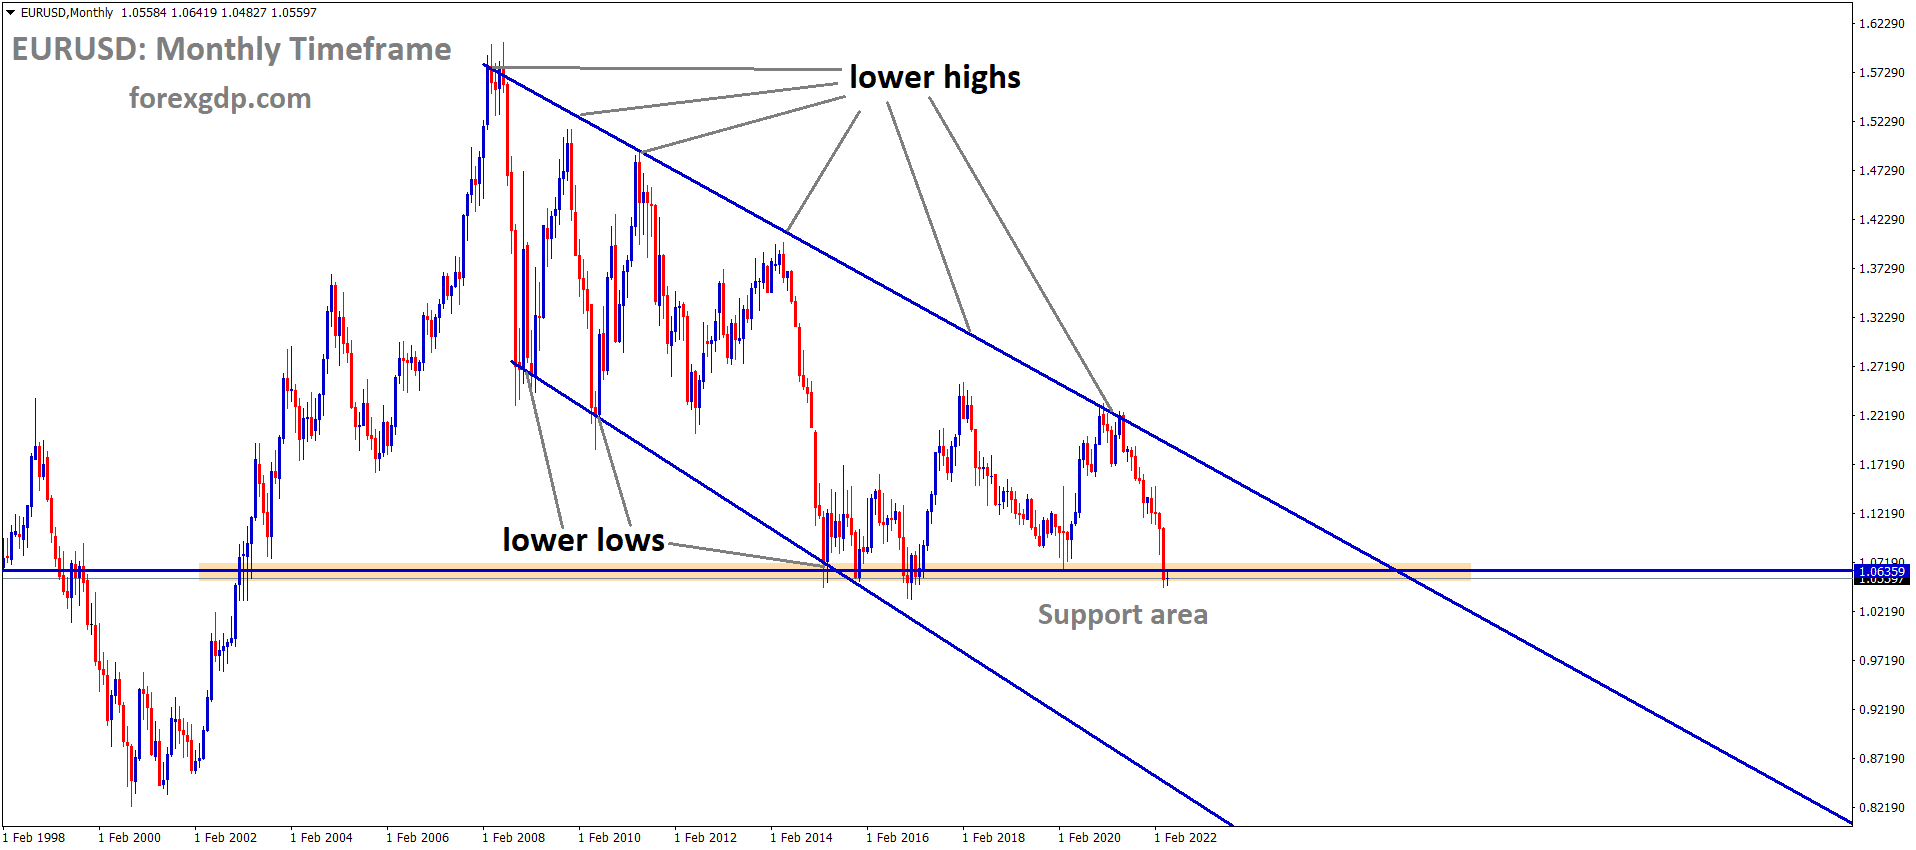 EURUSD Monthly Time Frame Analysis Market is moving in the Descending channel and the Market has reached the Horizontal Support area of the Pattern